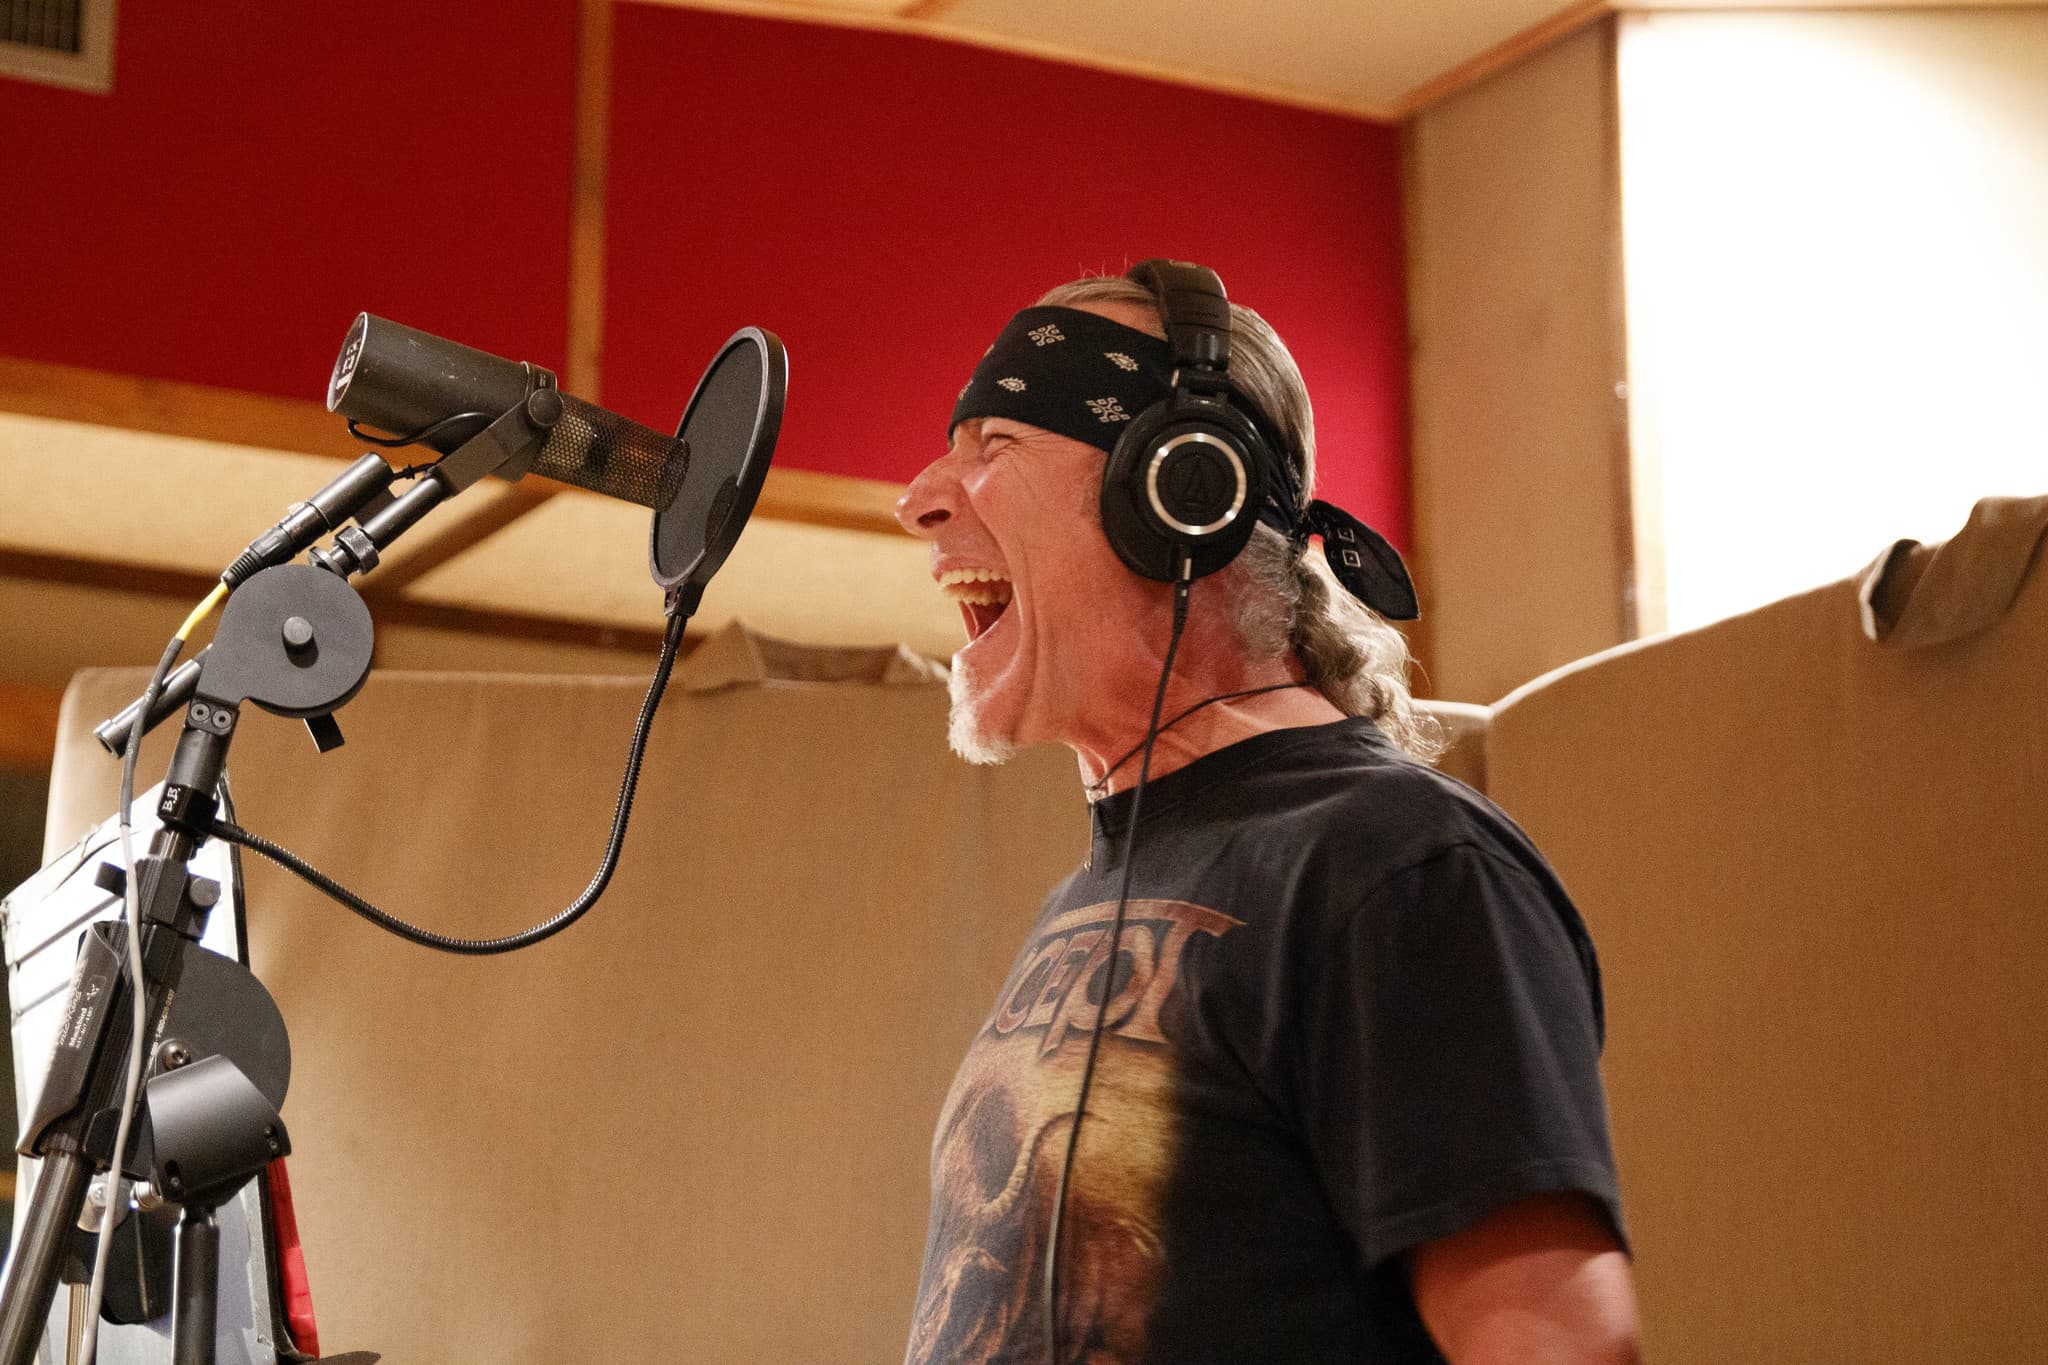 Charlie tracking vocals, singing into mic